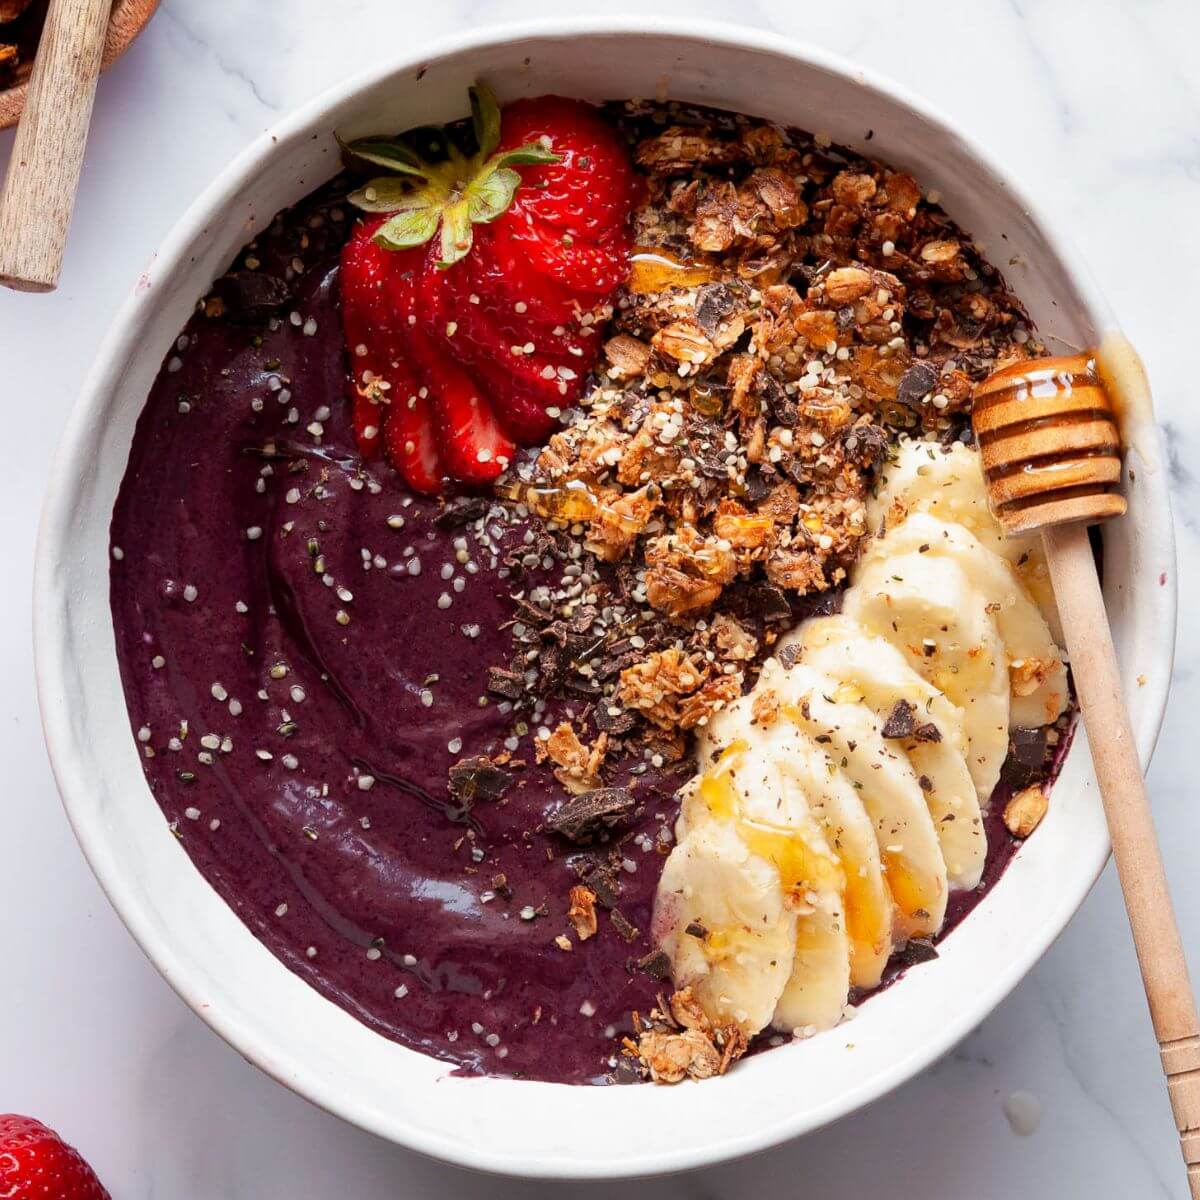 8 Facts About National Acai Bowl Day April 6th 